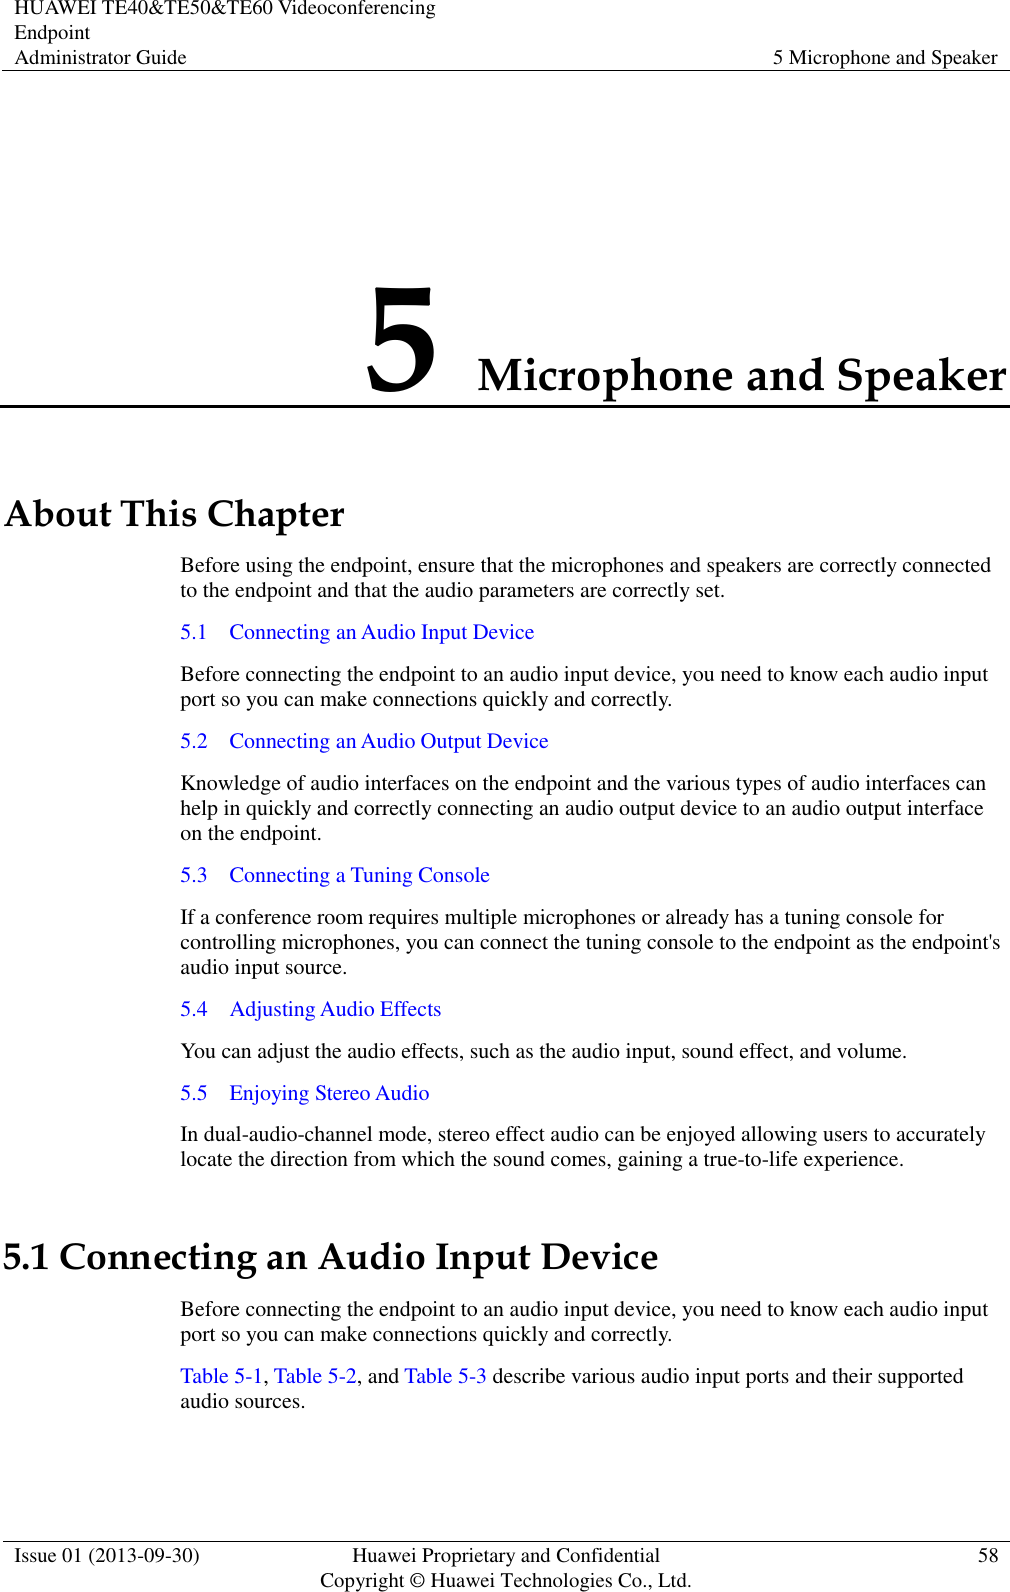 HUAWEI TE40&amp;TE50&amp;TE60 Videoconferencing Endpoint Administrator Guide 5 Microphone and Speaker  Issue 01 (2013-09-30) Huawei Proprietary and Confidential                                     Copyright © Huawei Technologies Co., Ltd. 58  5 Microphone and Speaker About This Chapter Before using the endpoint, ensure that the microphones and speakers are correctly connected to the endpoint and that the audio parameters are correctly set.   5.1    Connecting an Audio Input Device Before connecting the endpoint to an audio input device, you need to know each audio input port so you can make connections quickly and correctly. 5.2    Connecting an Audio Output Device Knowledge of audio interfaces on the endpoint and the various types of audio interfaces can help in quickly and correctly connecting an audio output device to an audio output interface on the endpoint. 5.3    Connecting a Tuning Console If a conference room requires multiple microphones or already has a tuning console for controlling microphones, you can connect the tuning console to the endpoint as the endpoint&apos;s audio input source. 5.4    Adjusting Audio Effects You can adjust the audio effects, such as the audio input, sound effect, and volume. 5.5    Enjoying Stereo Audio In dual-audio-channel mode, stereo effect audio can be enjoyed allowing users to accurately locate the direction from which the sound comes, gaining a true-to-life experience.   5.1 Connecting an Audio Input Device Before connecting the endpoint to an audio input device, you need to know each audio input port so you can make connections quickly and correctly. Table 5-1, Table 5-2, and Table 5-3 describe various audio input ports and their supported audio sources. 